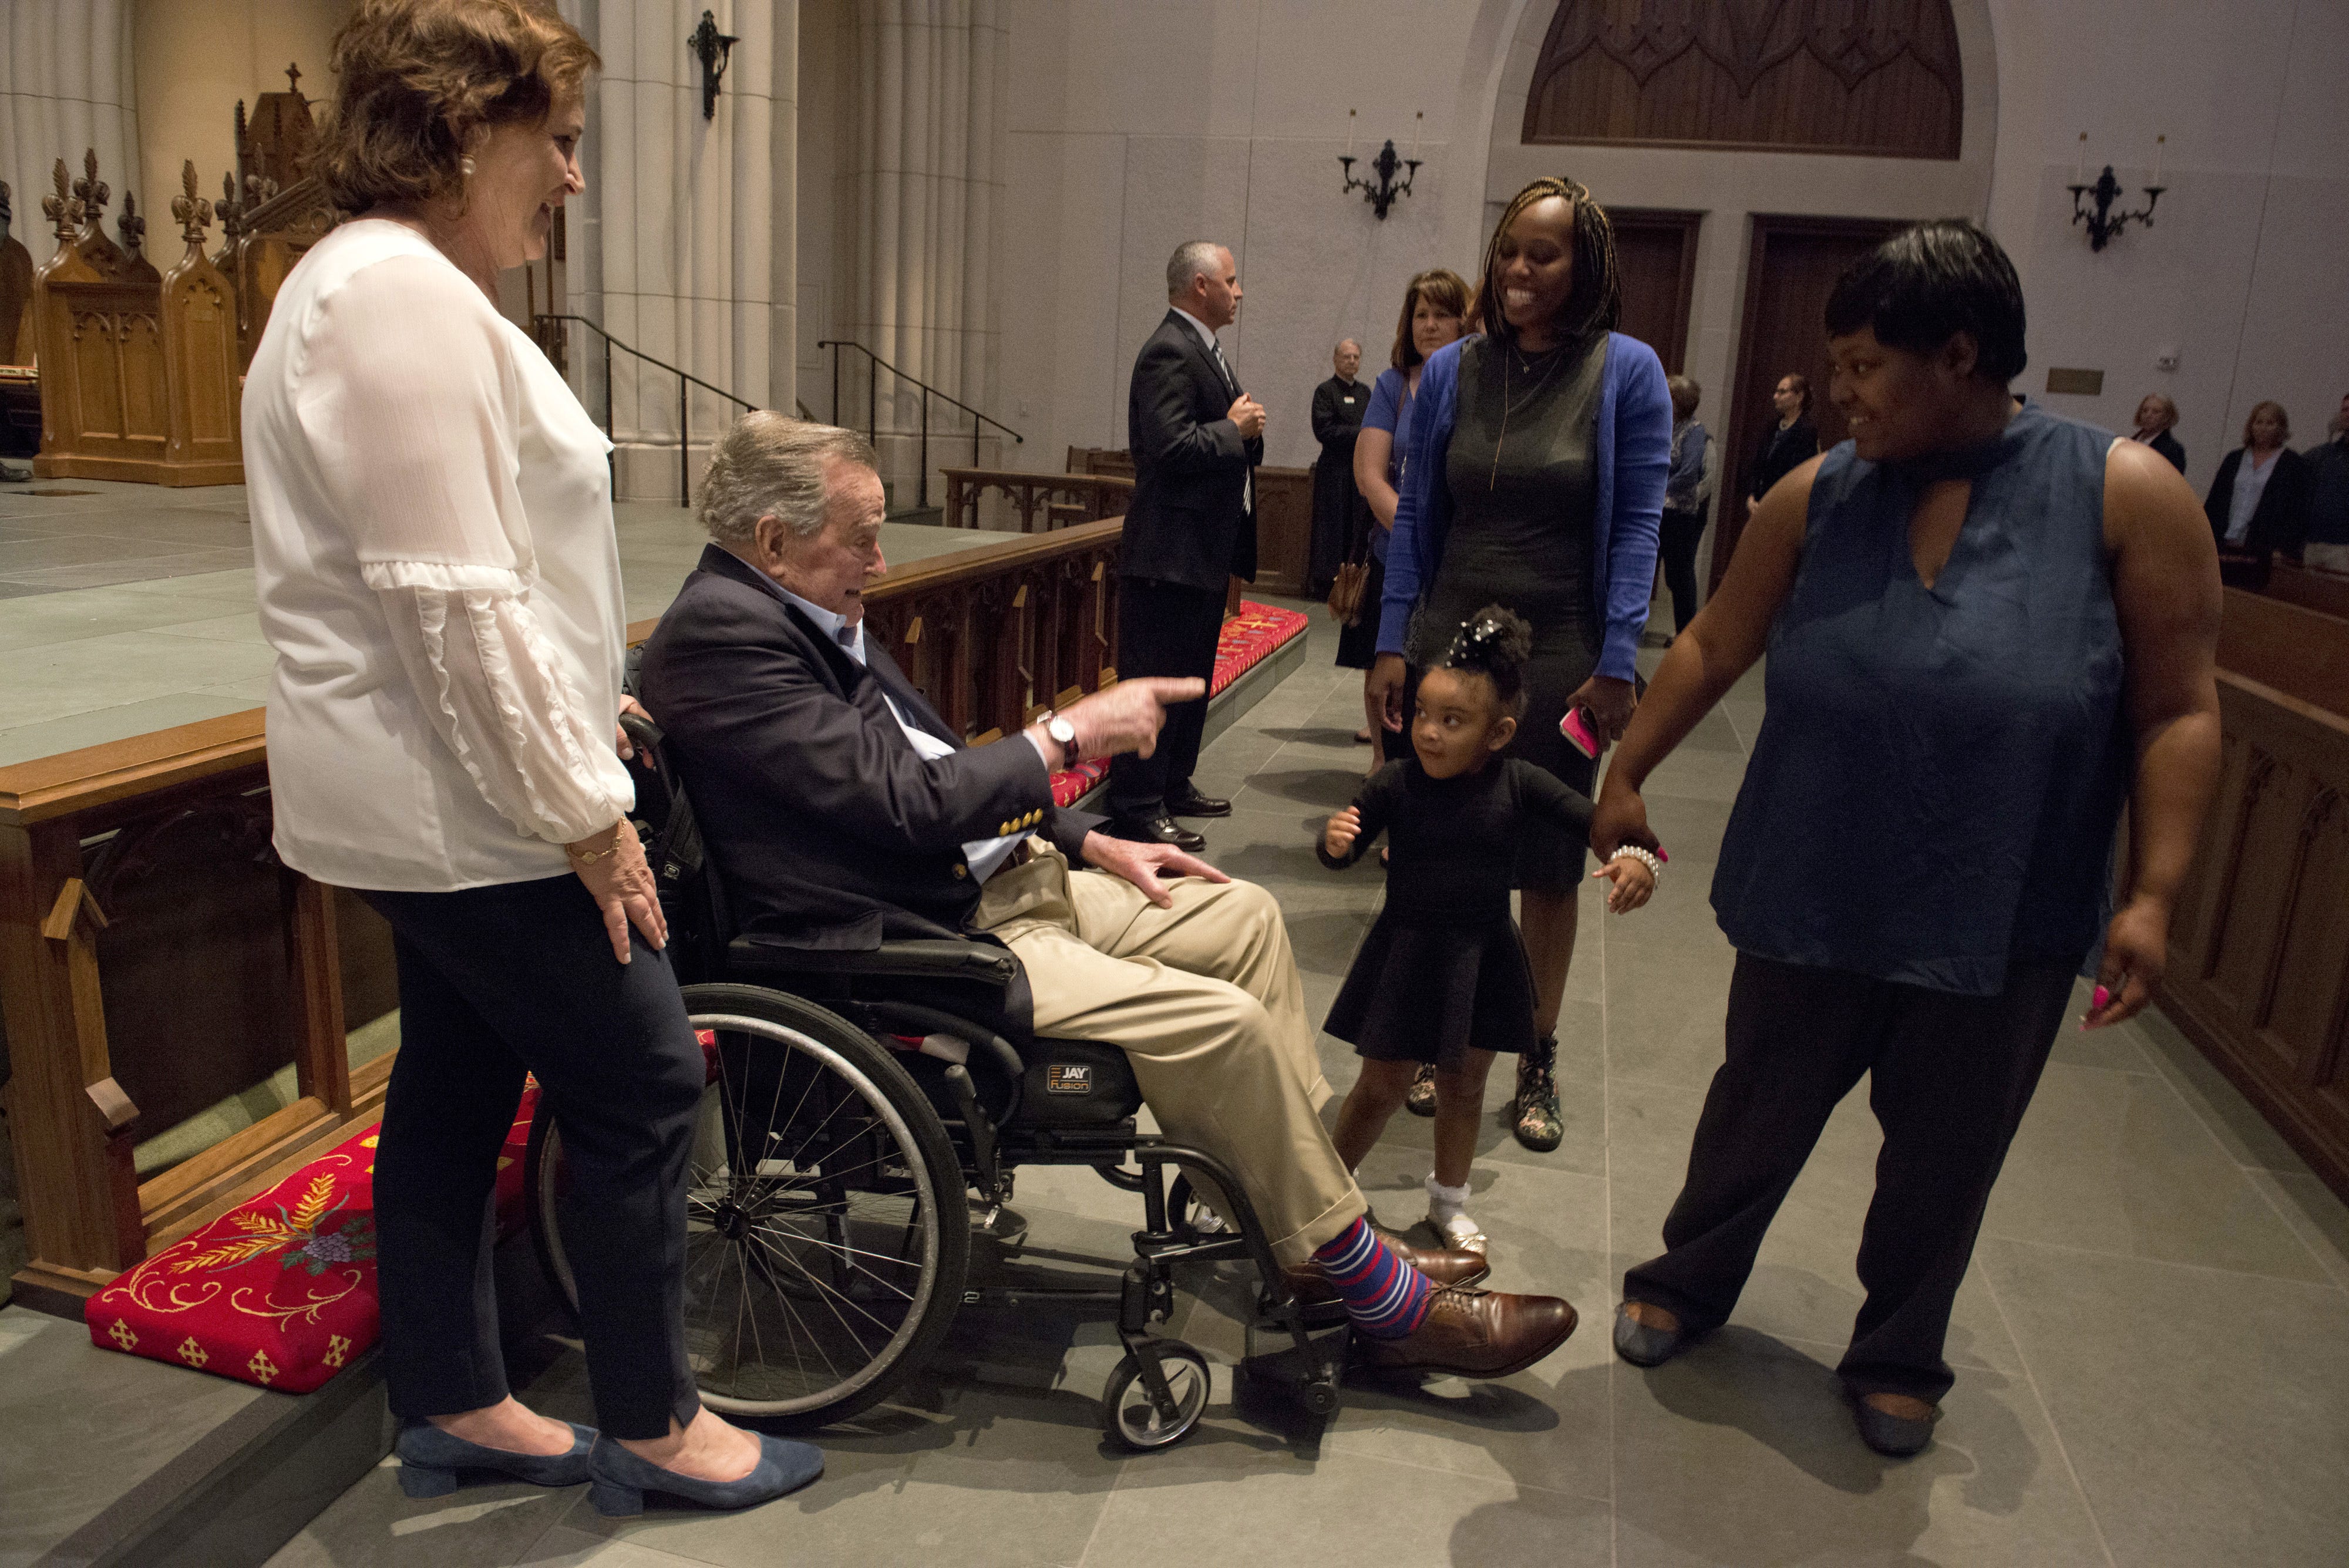 George H.W. Bush greets people paying respects to Barbara Bush